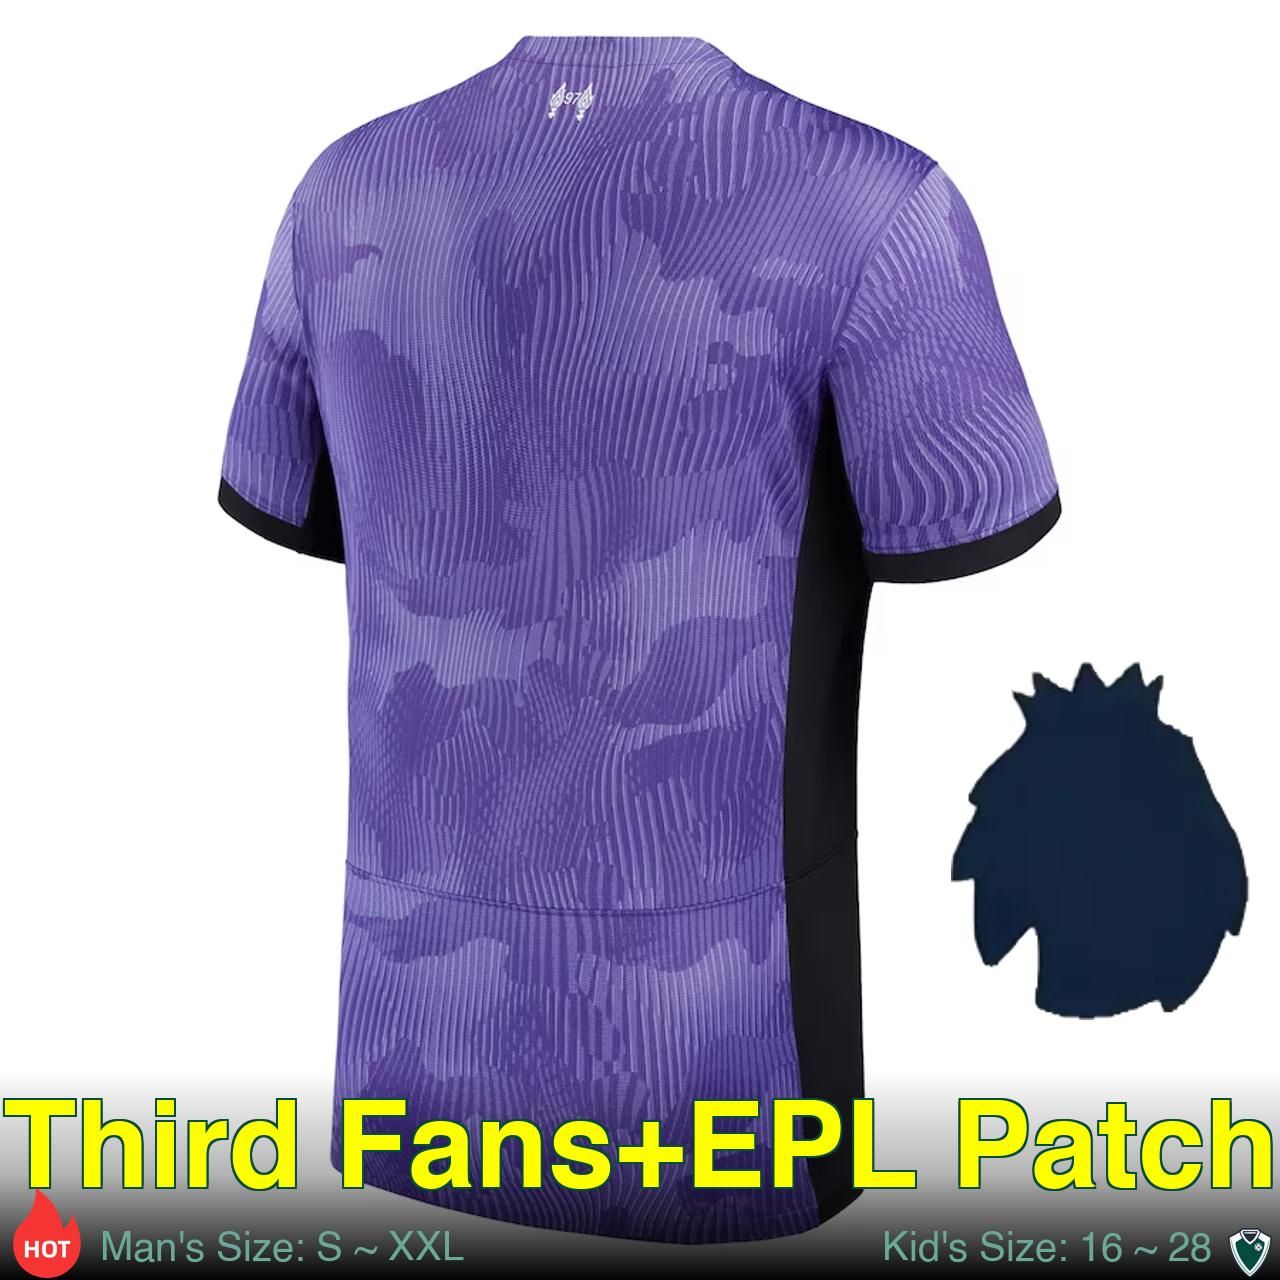 Third Fans+EPL Patch